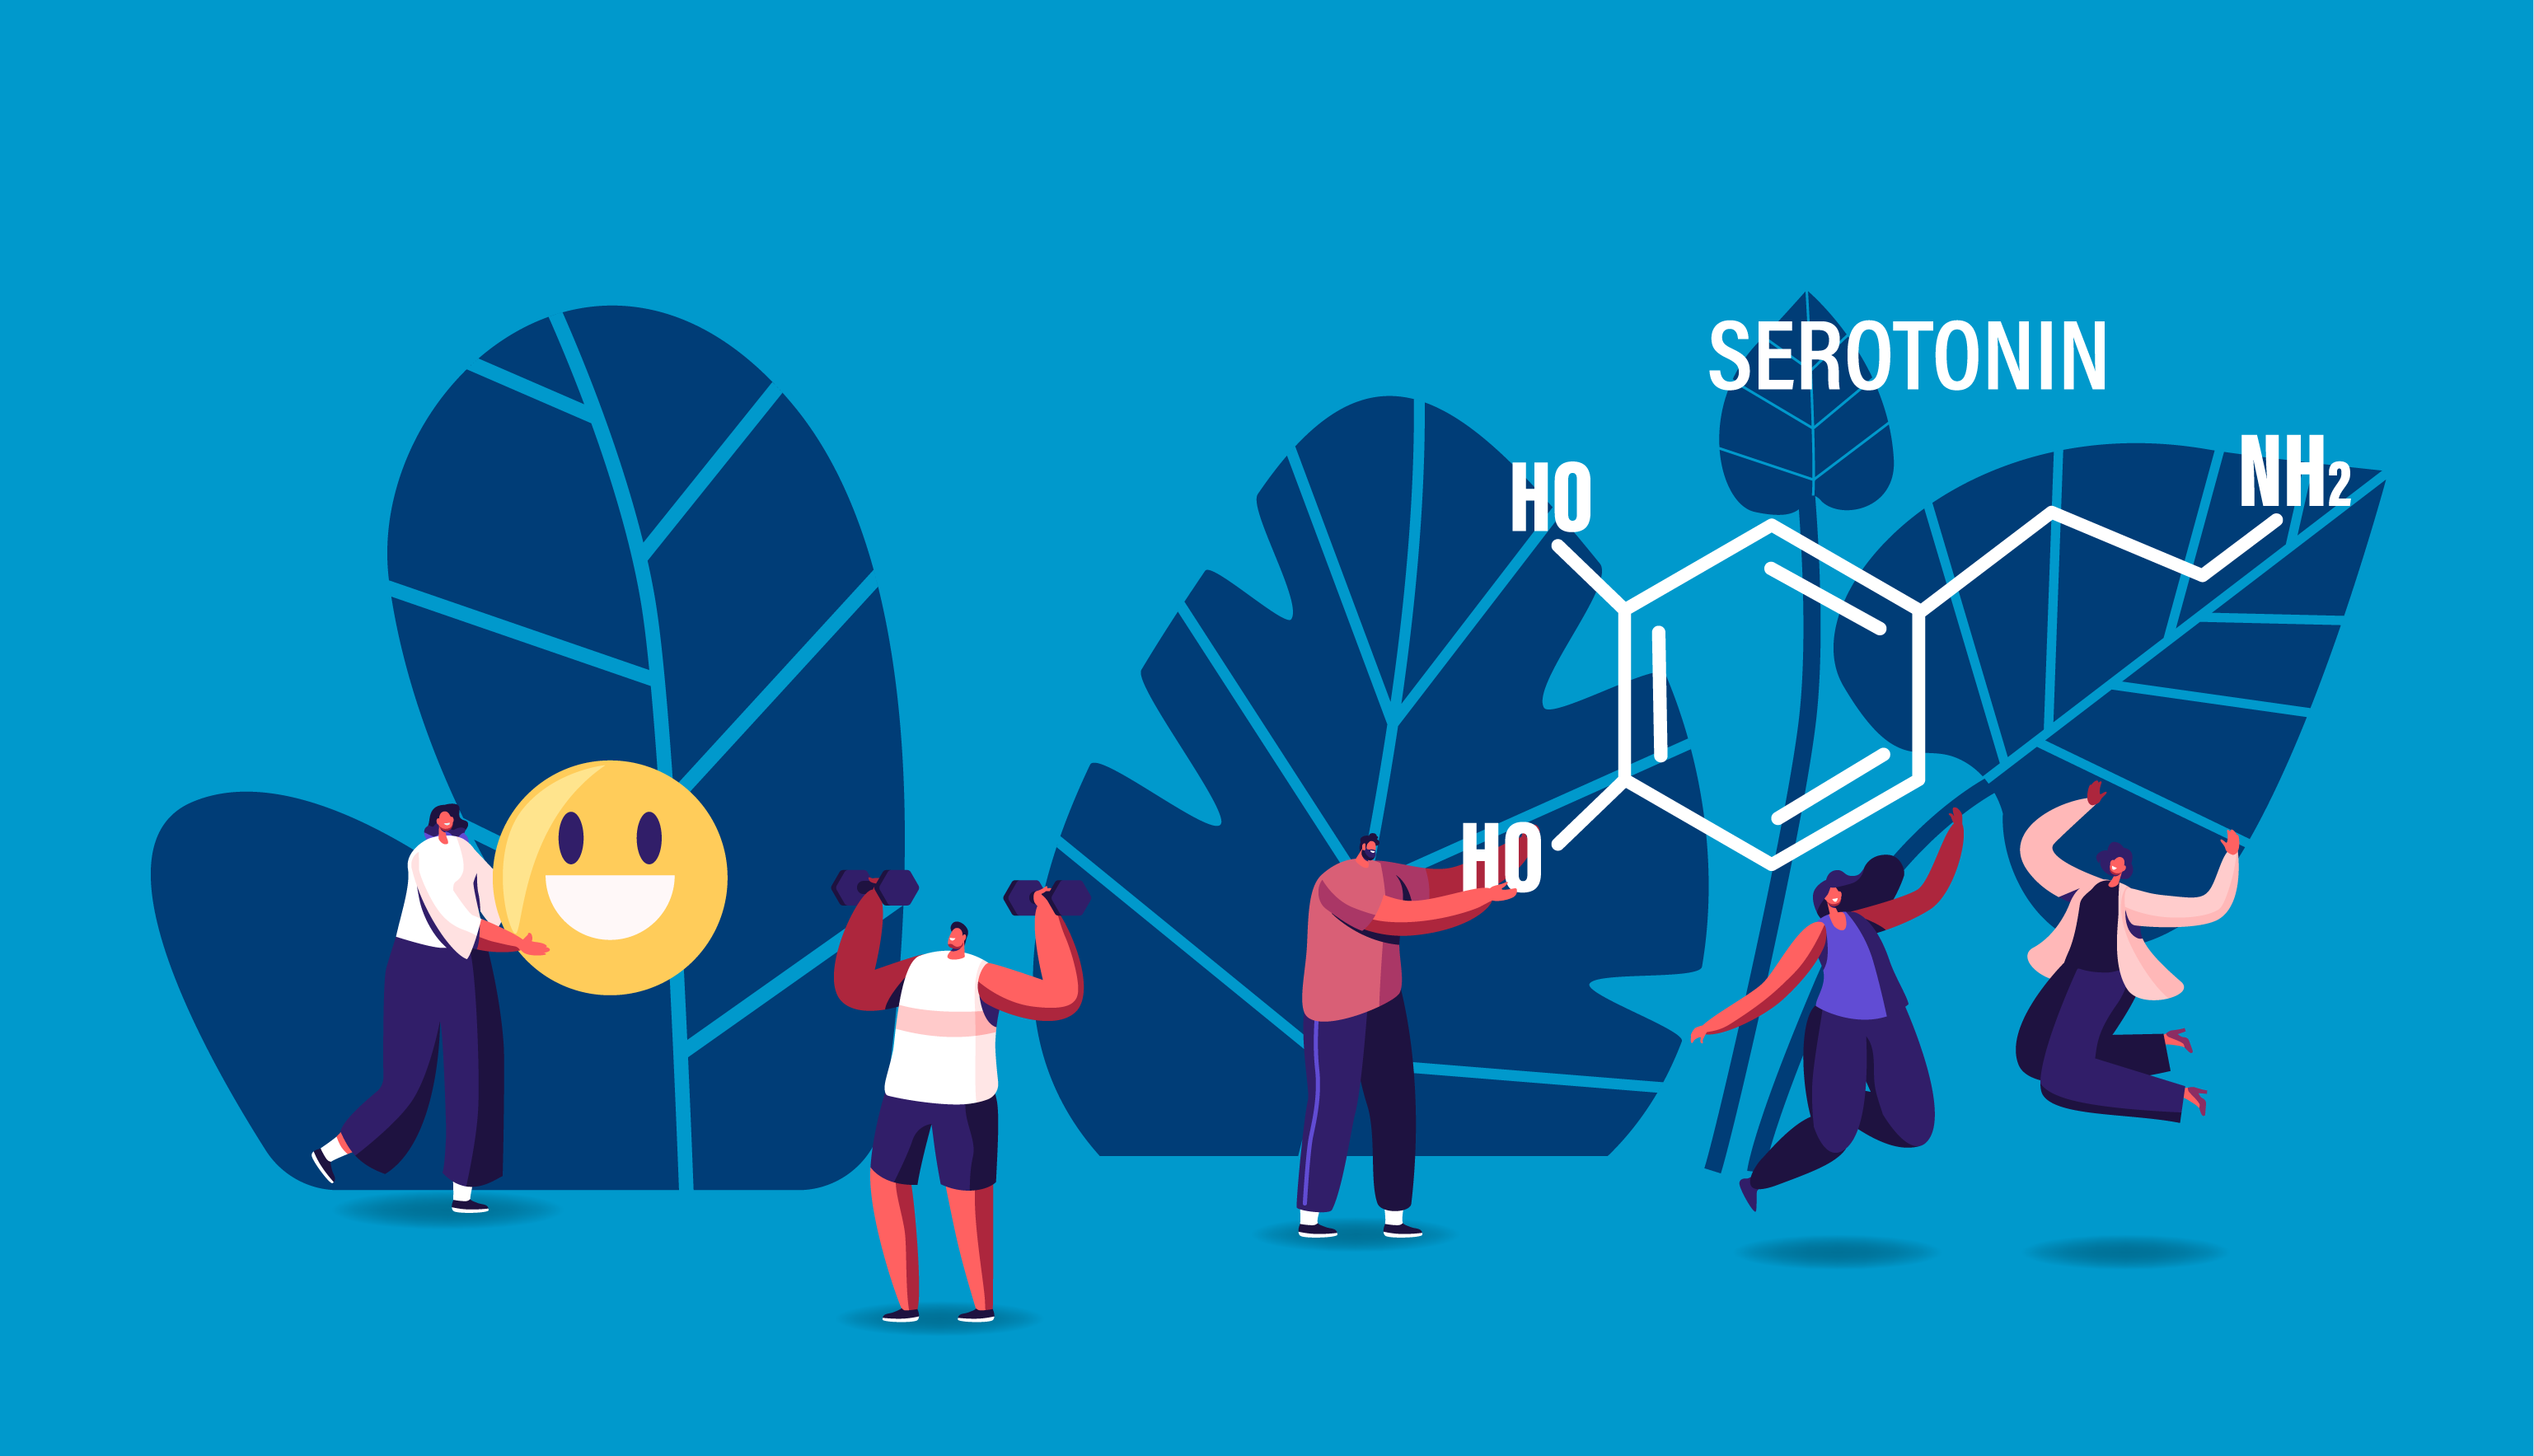 A graphic with people and a serotonin molecule